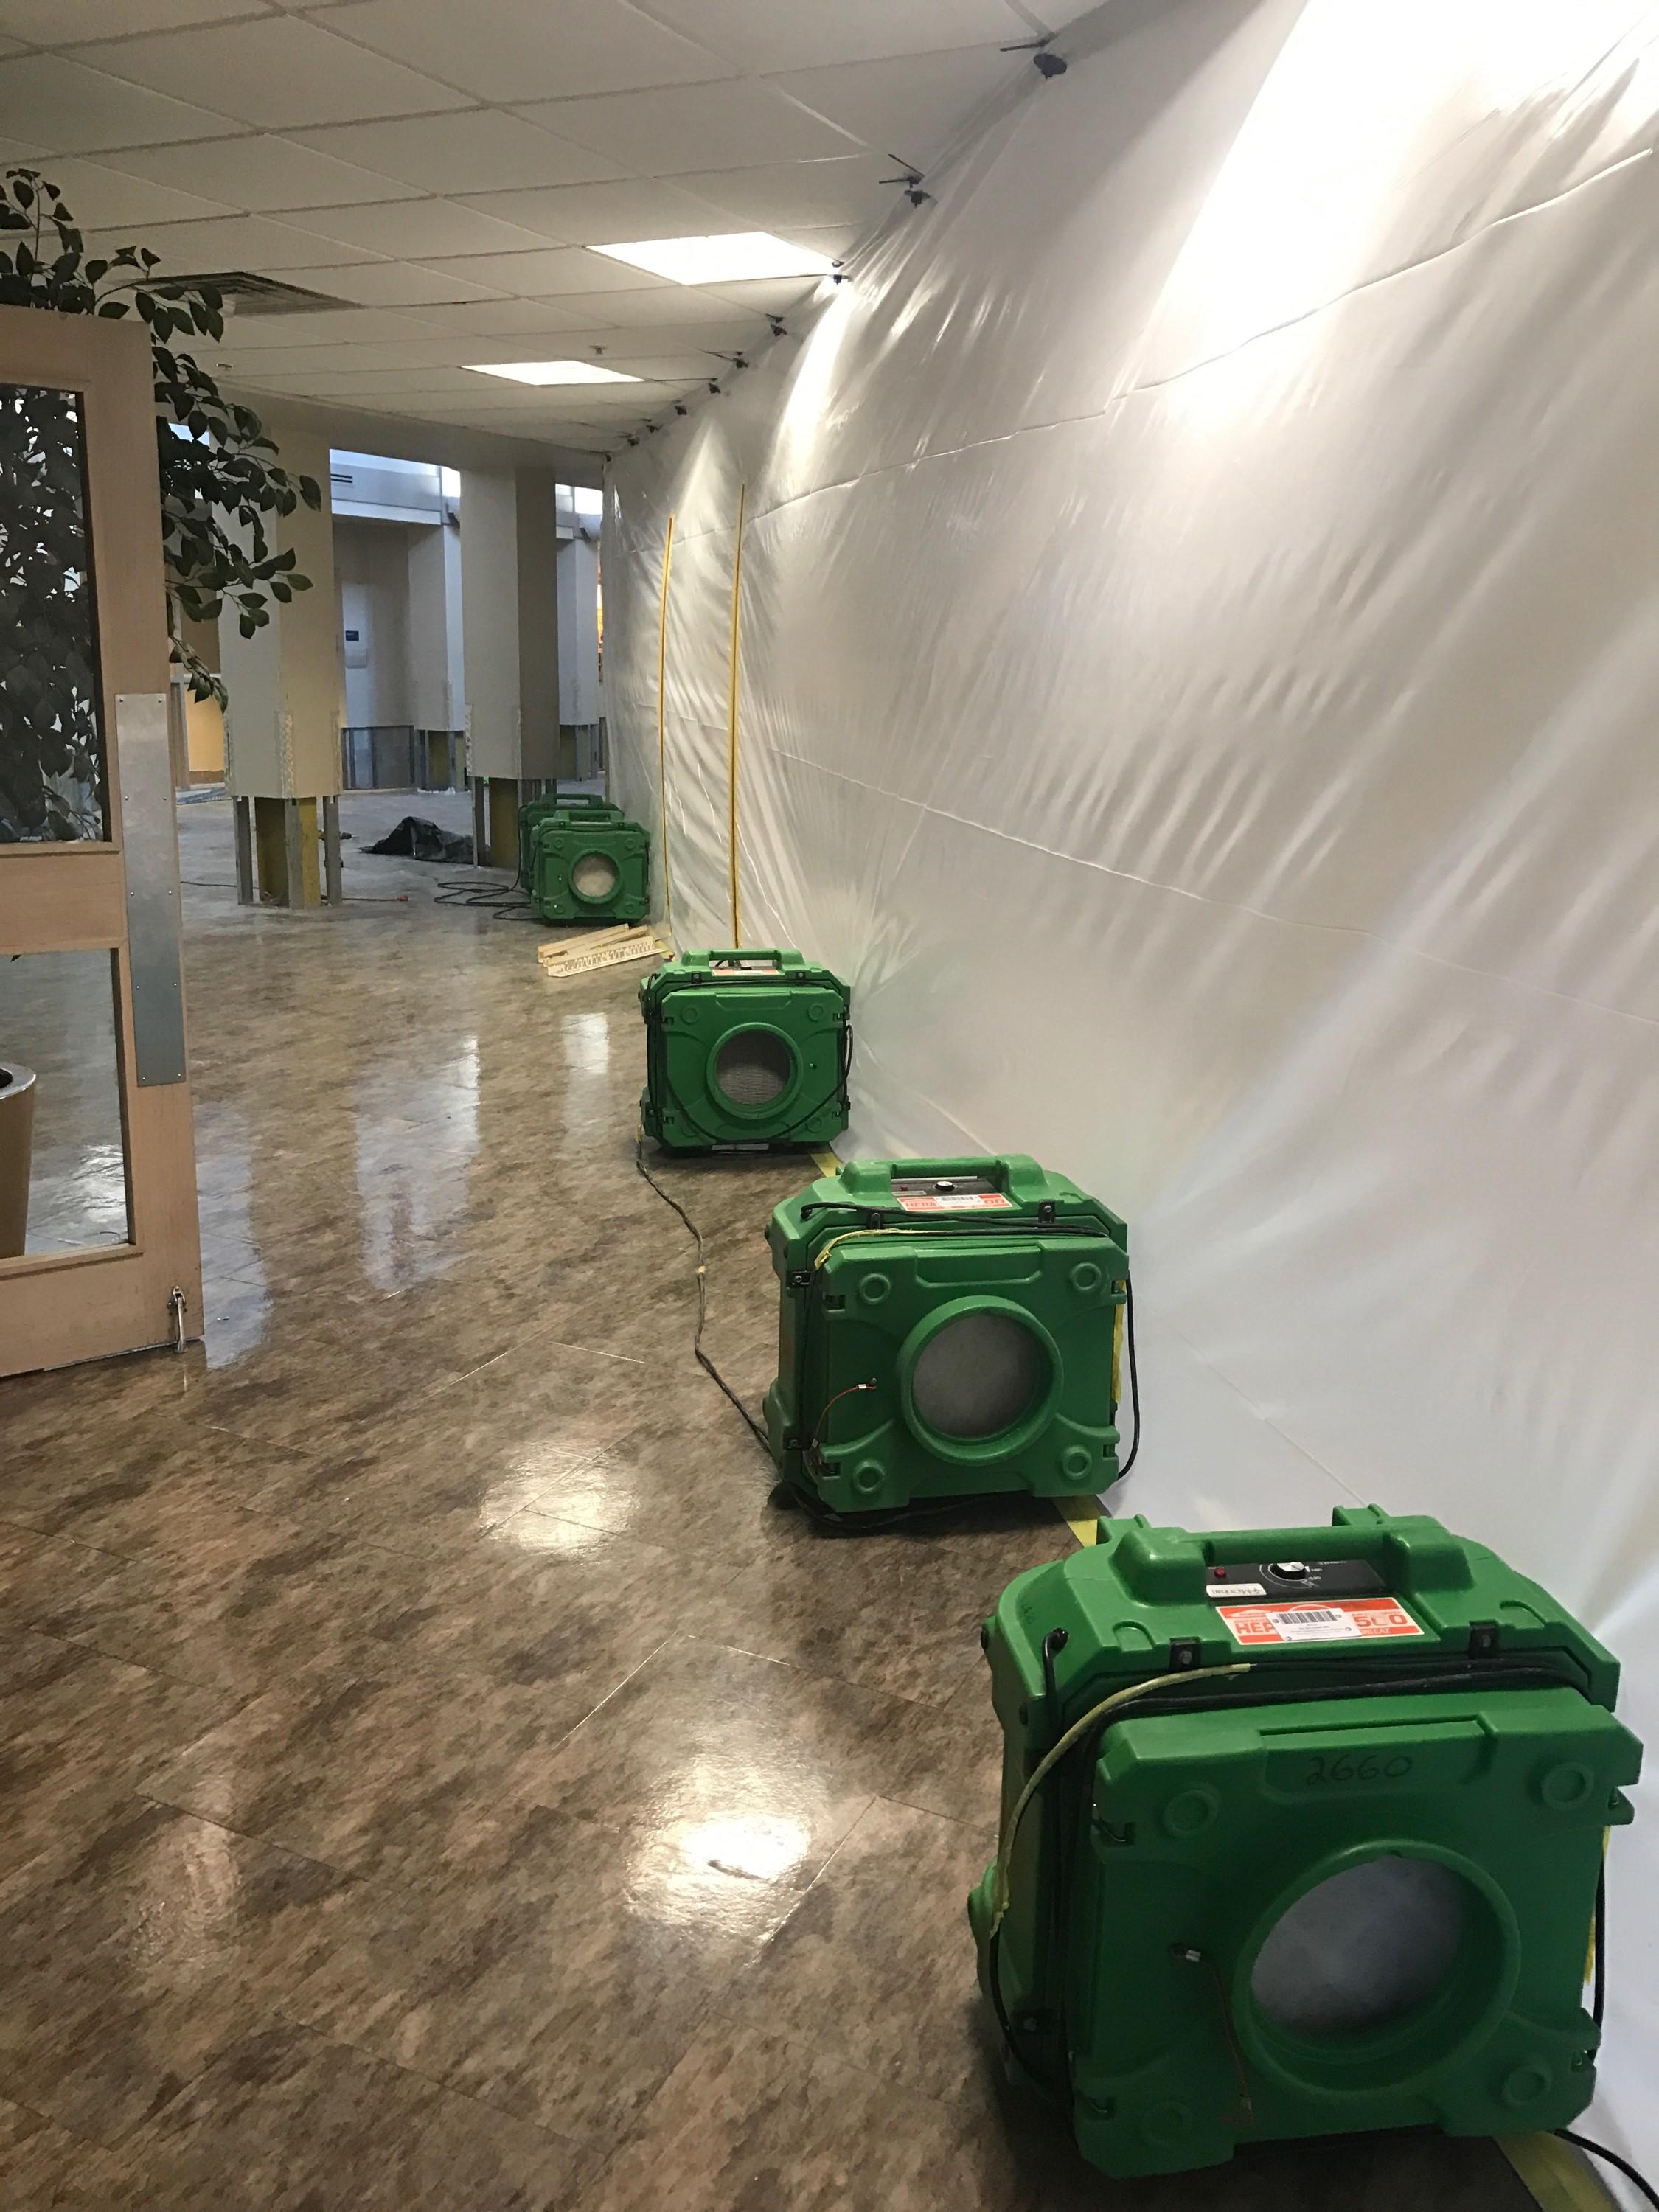 After weeks of catastrophic rain/flooding at the Great Lakes Naval Base in Illinois, SERVPRO of The Seacoast set-up several barriers and fans to dry the areas affected.